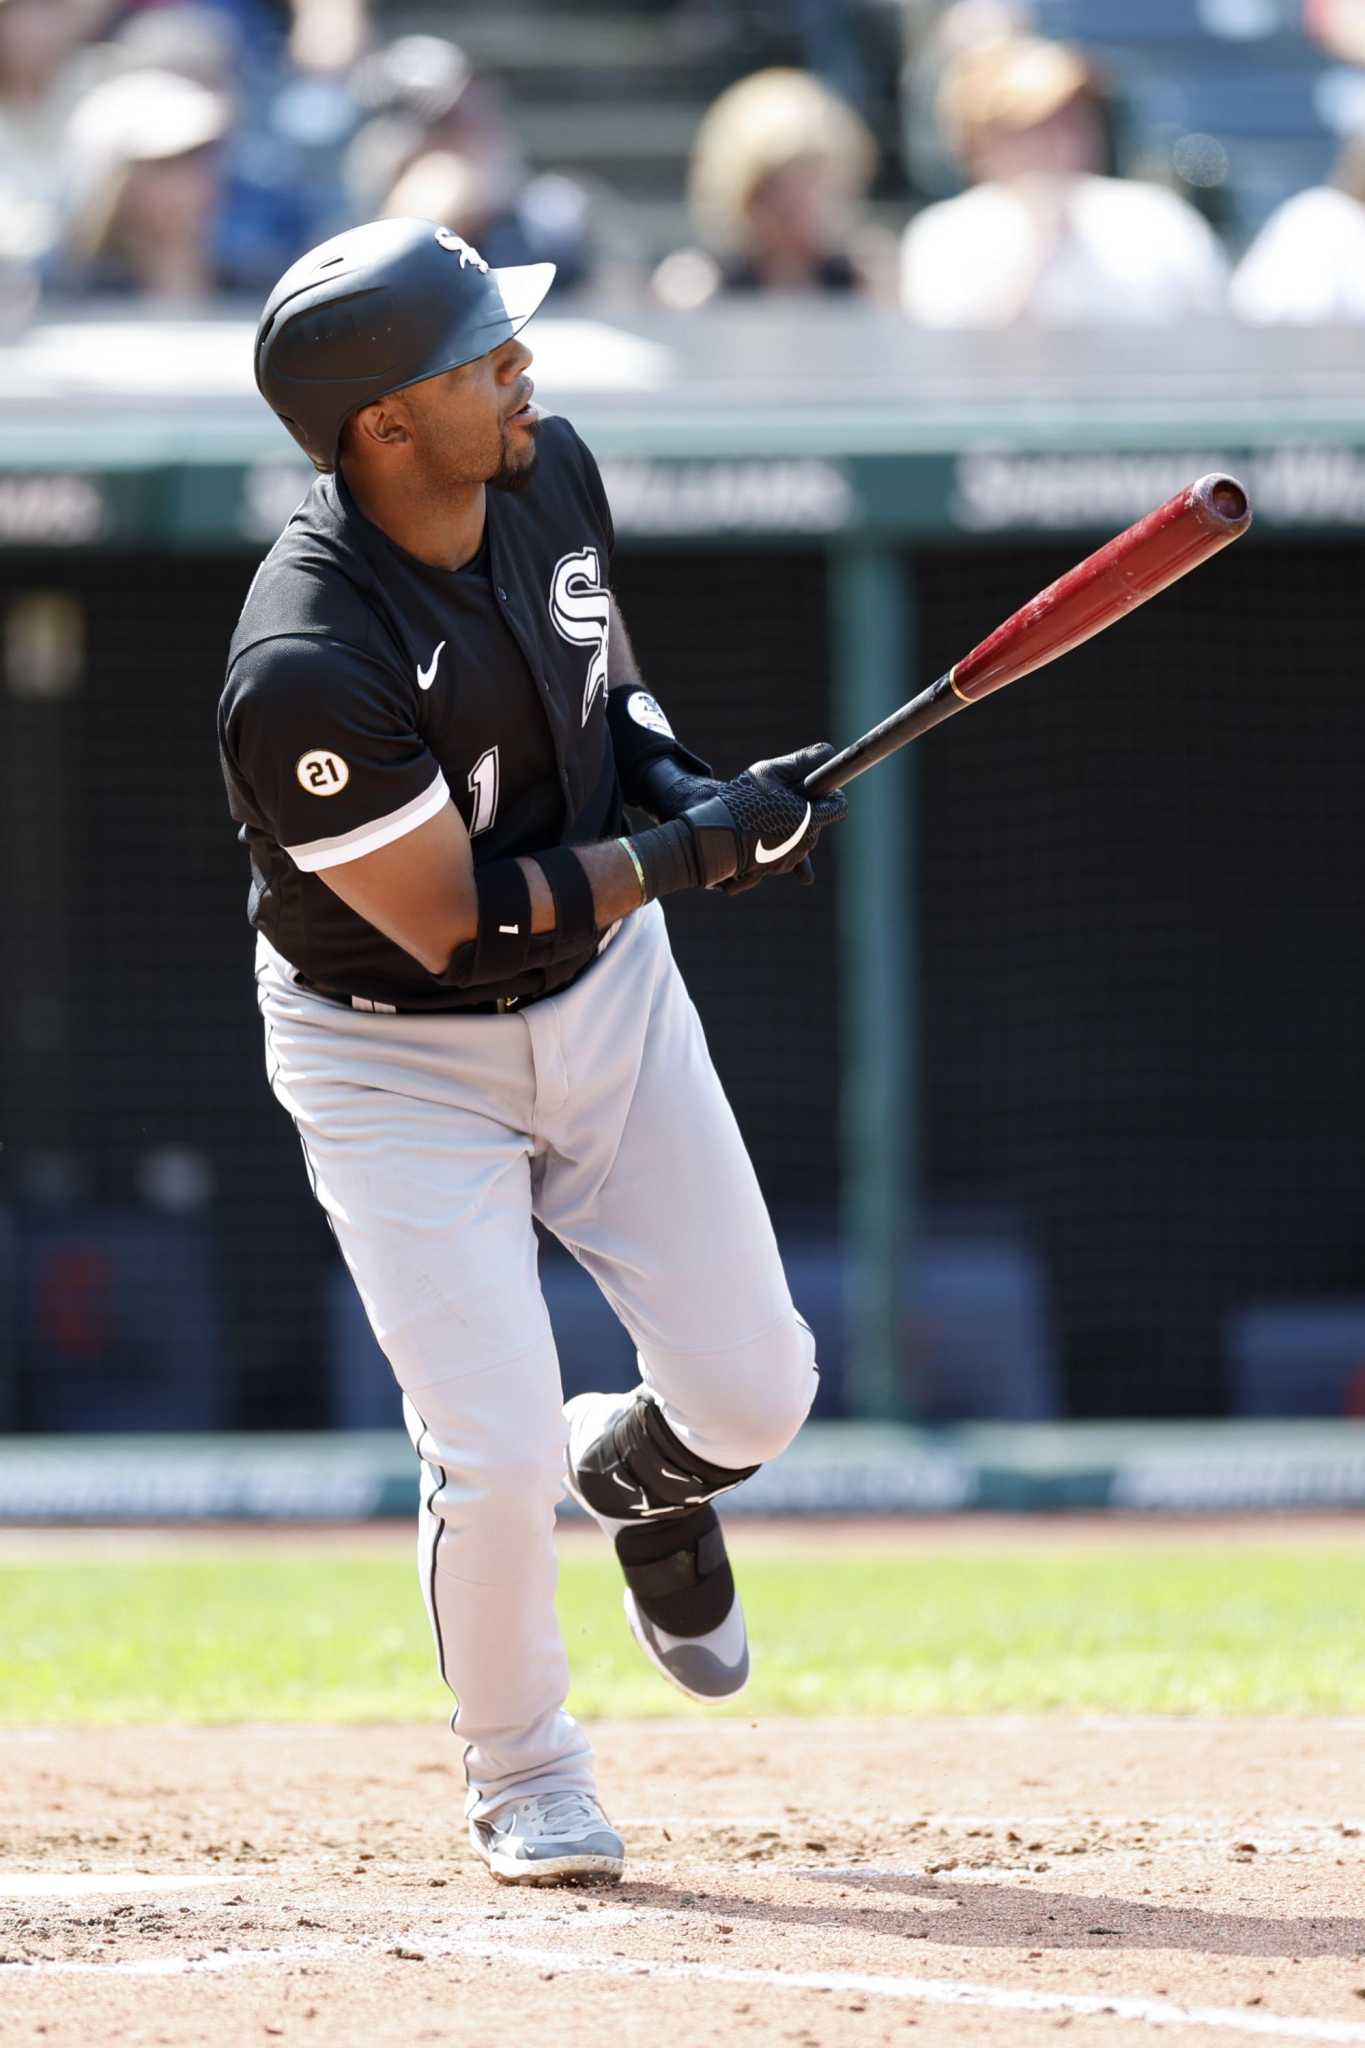 White Sox pound 5 homers, rock Central-leading Guardians 8-2